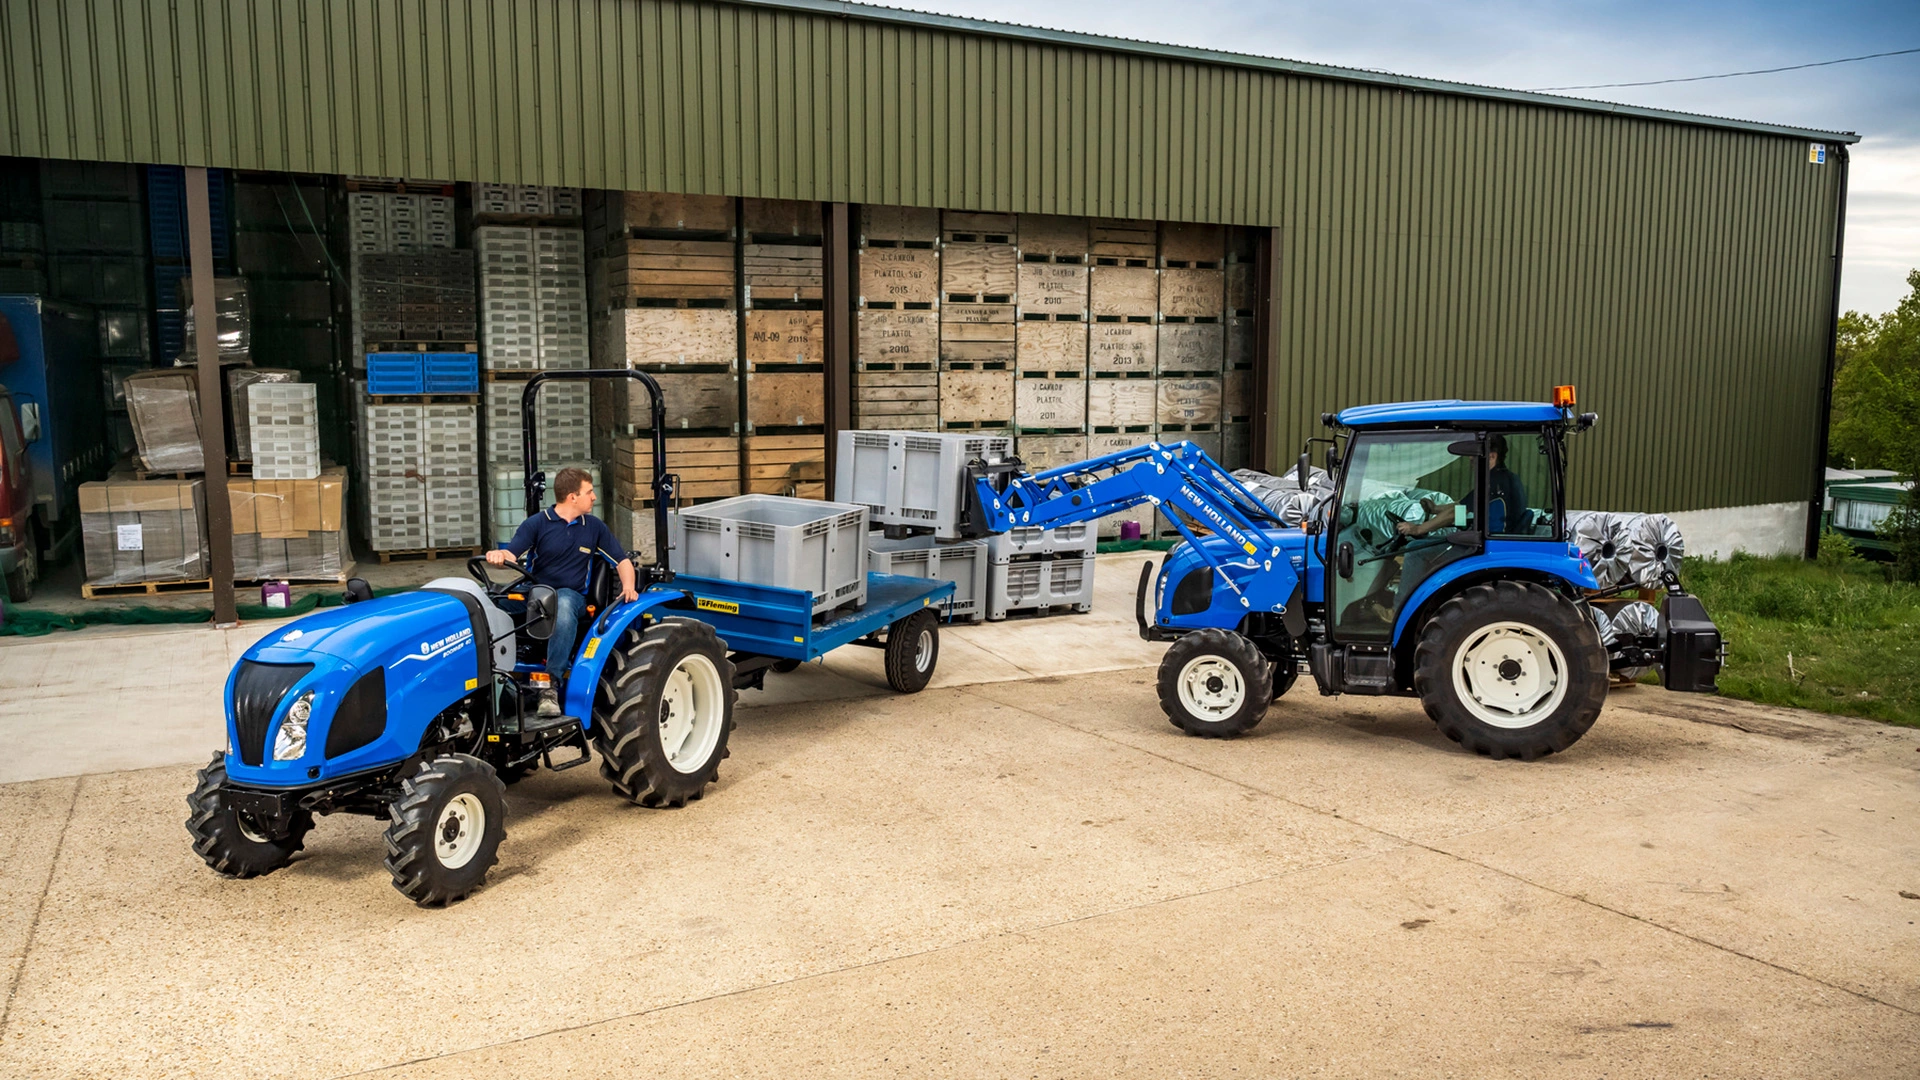 New Holland Boomer tractors with trailer and front loaders moving goods across the farm